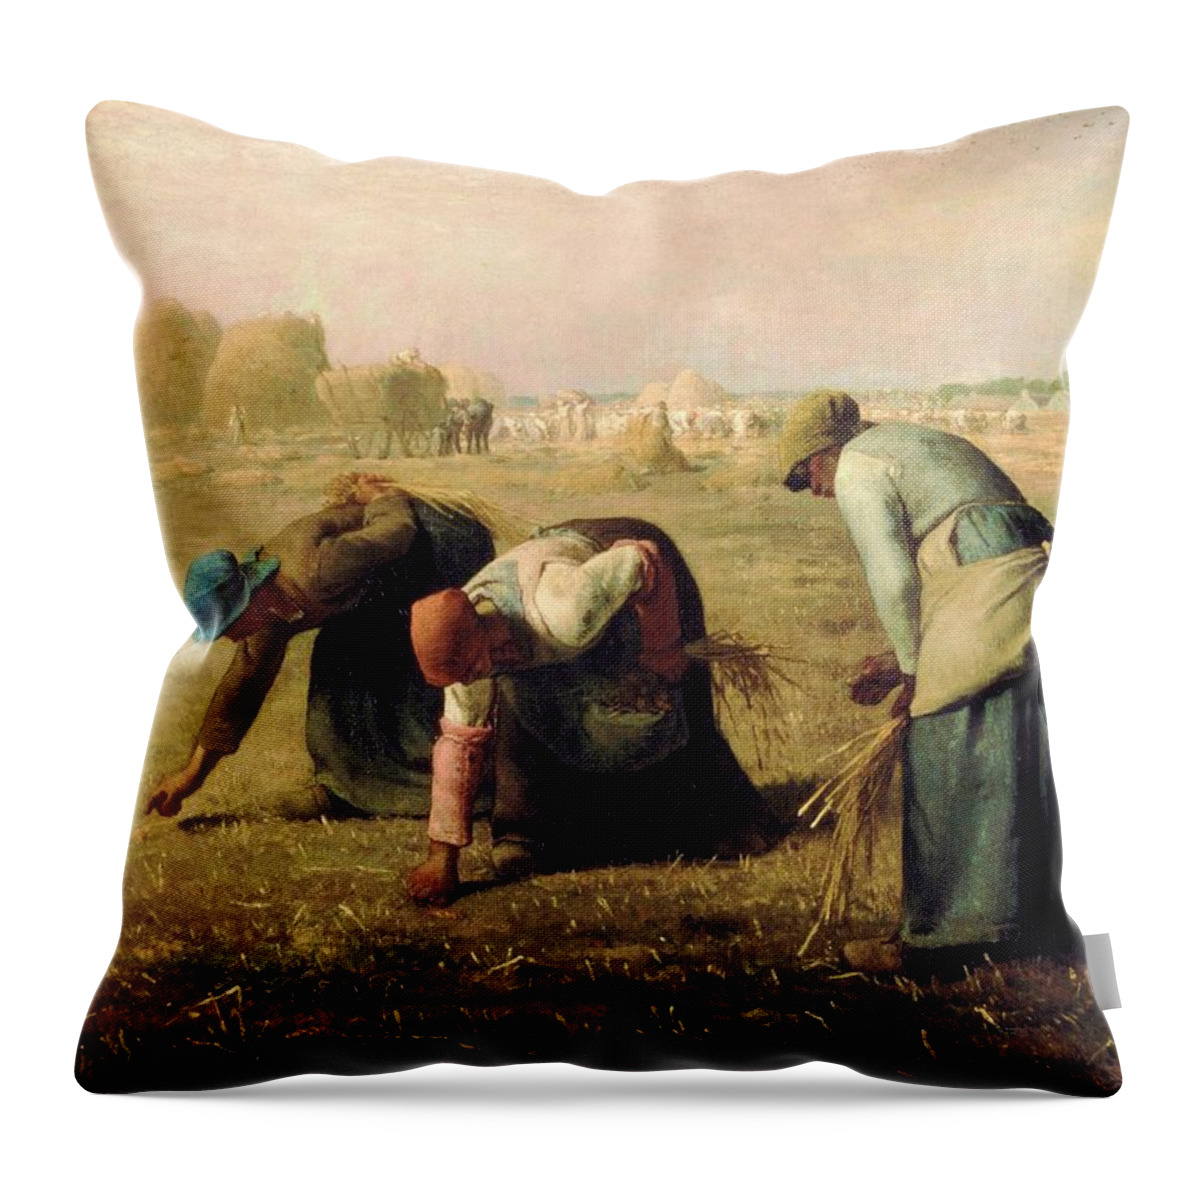 Gleaners Throw Pillow featuring the painting Gleaners by Jean Francois Millet